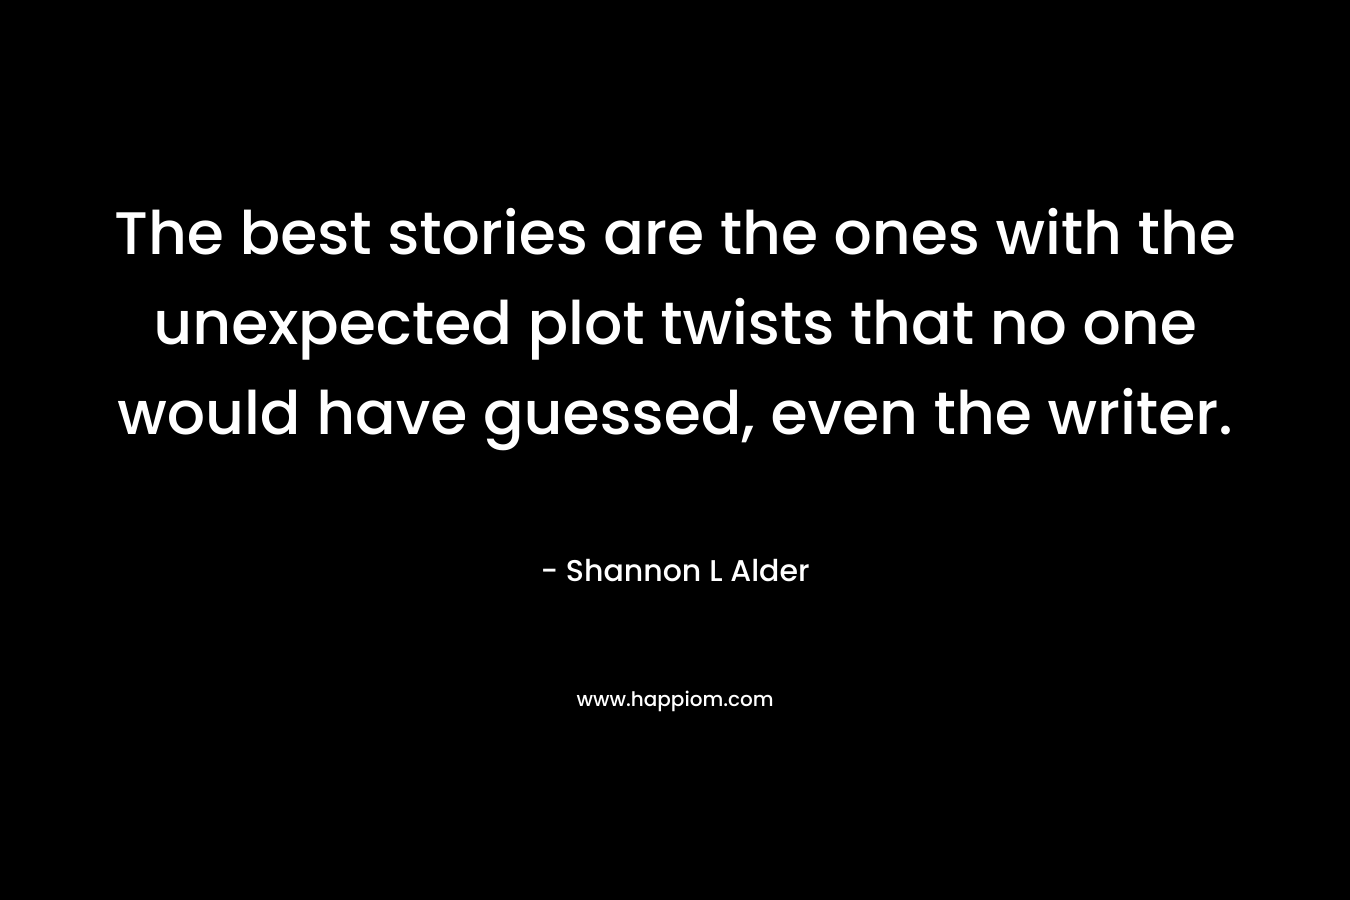 The best stories are the ones with the unexpected plot twists that no one would have guessed, even the writer. – Shannon L Alder